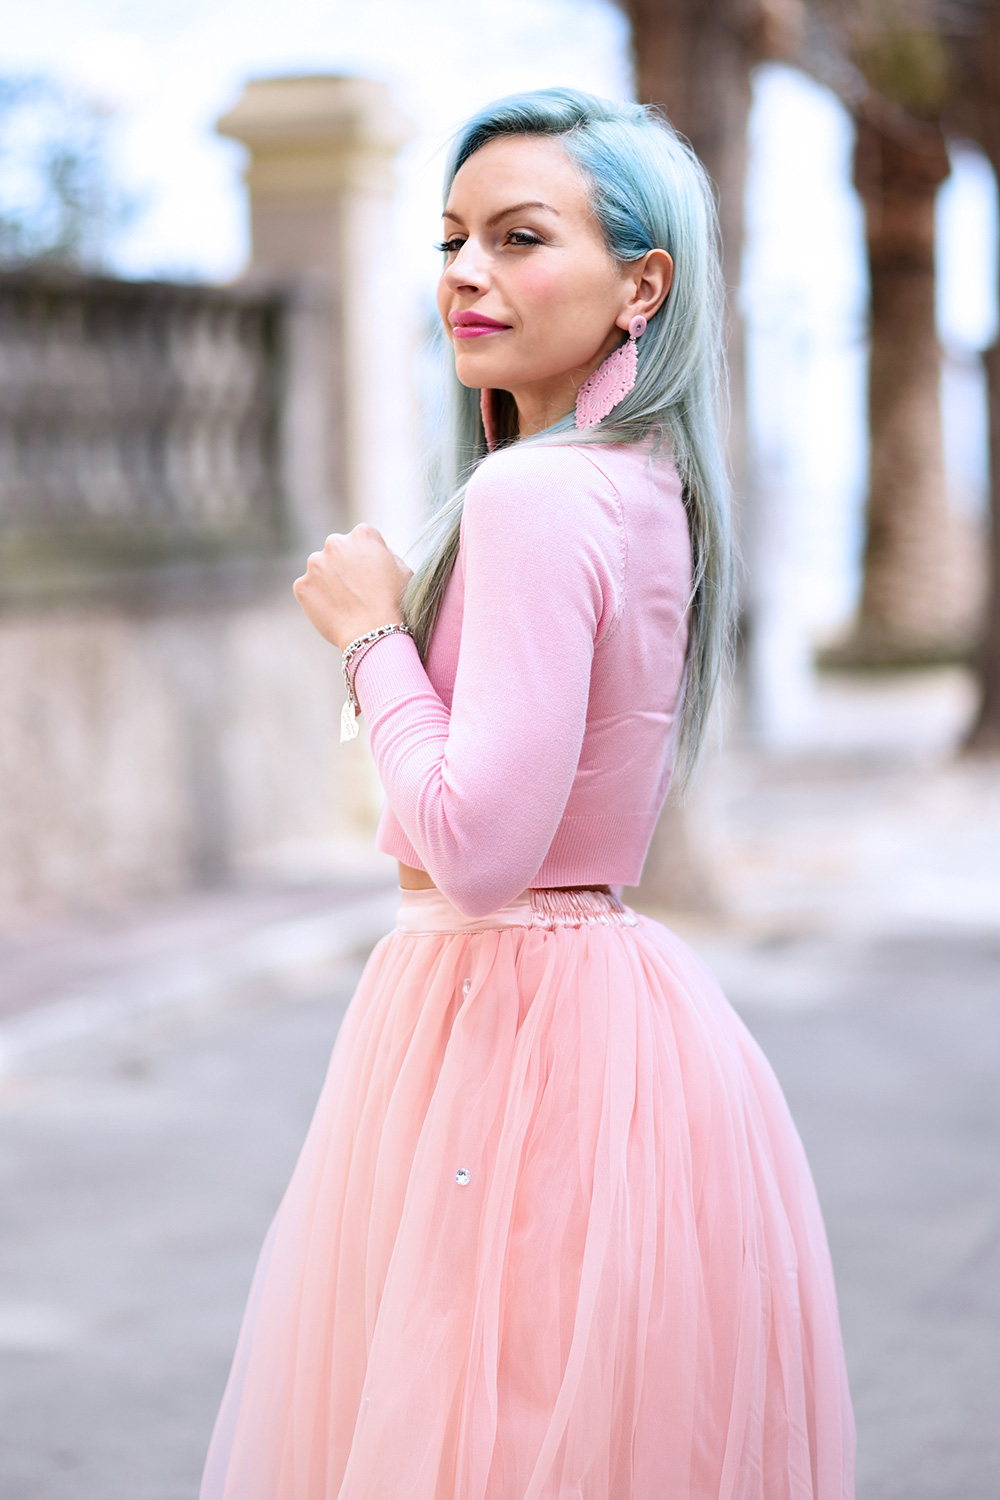 How to wear a Tutu skirt, tulle skirt, Chicwish Italia, Miss Guided heels, pink look idea, spring outfit, idea look elegante particolare primavera 2015 It-Girl by Eleonora Petrella